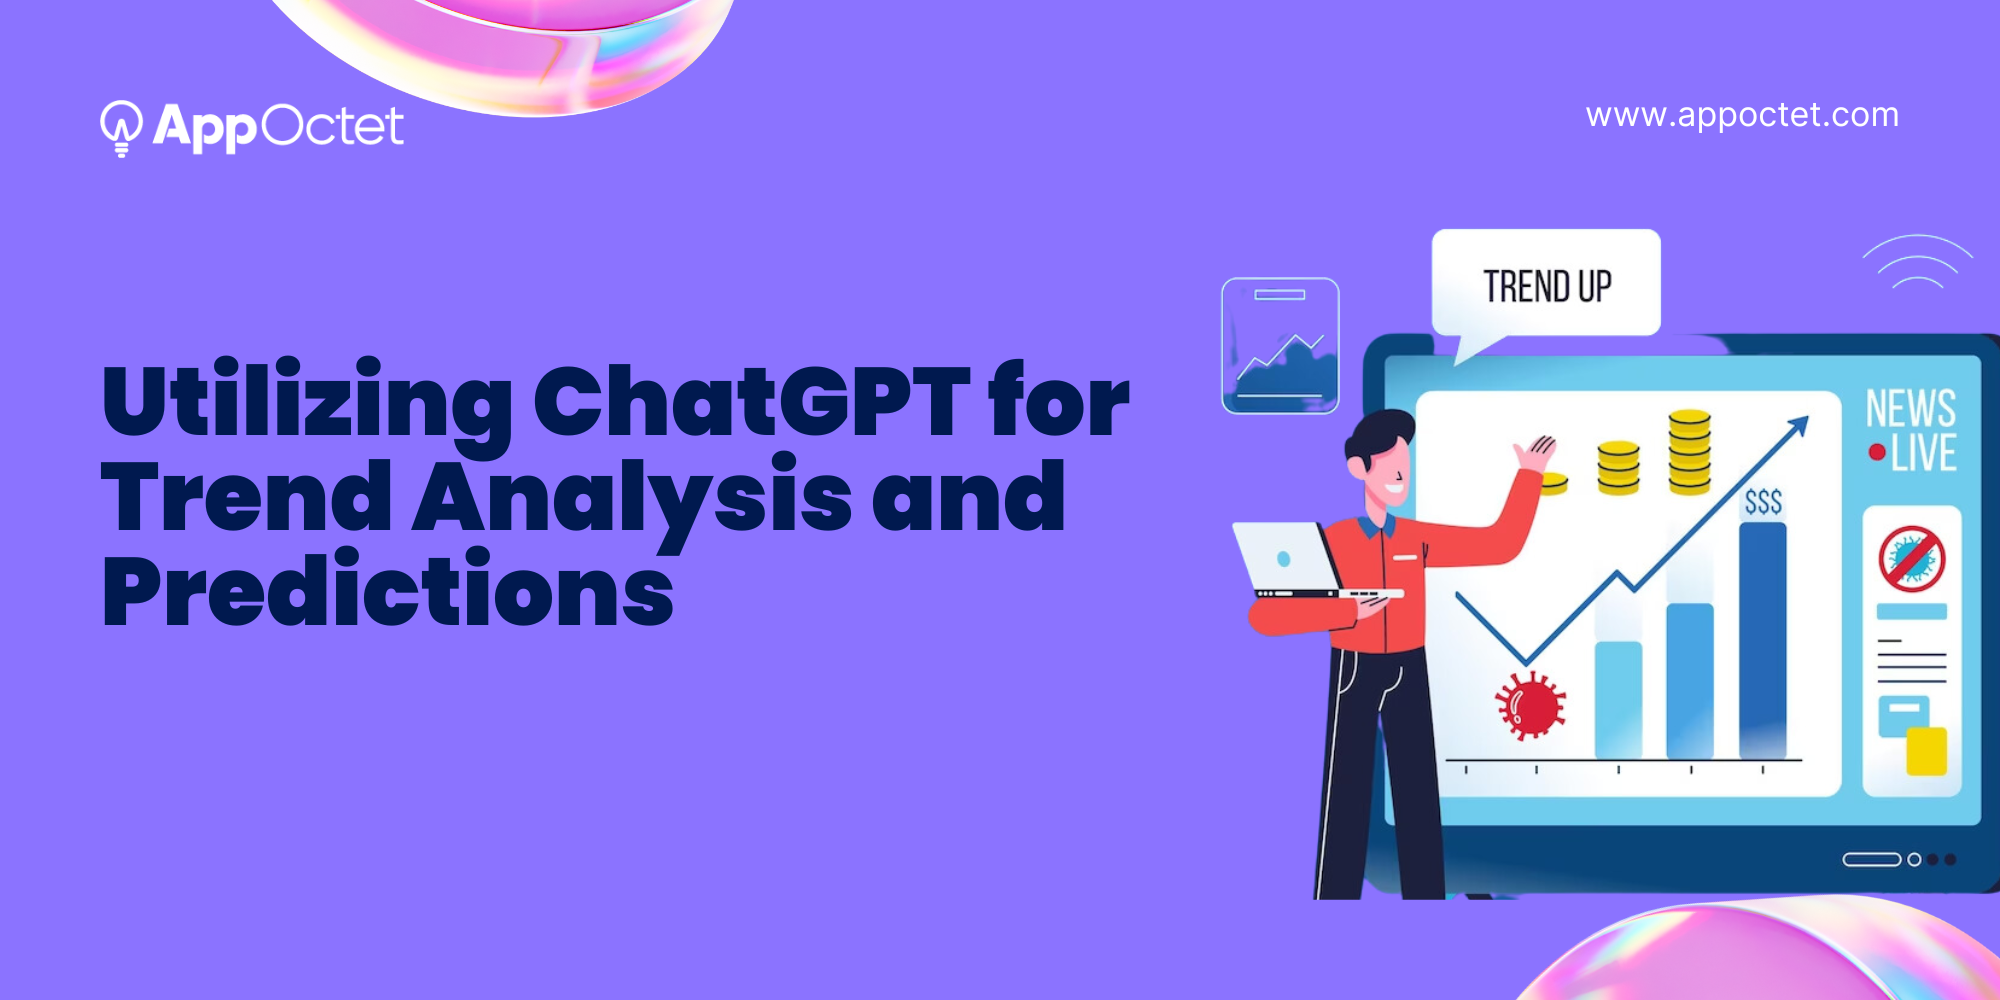 ChatGPT for Trend analysis and Predictions